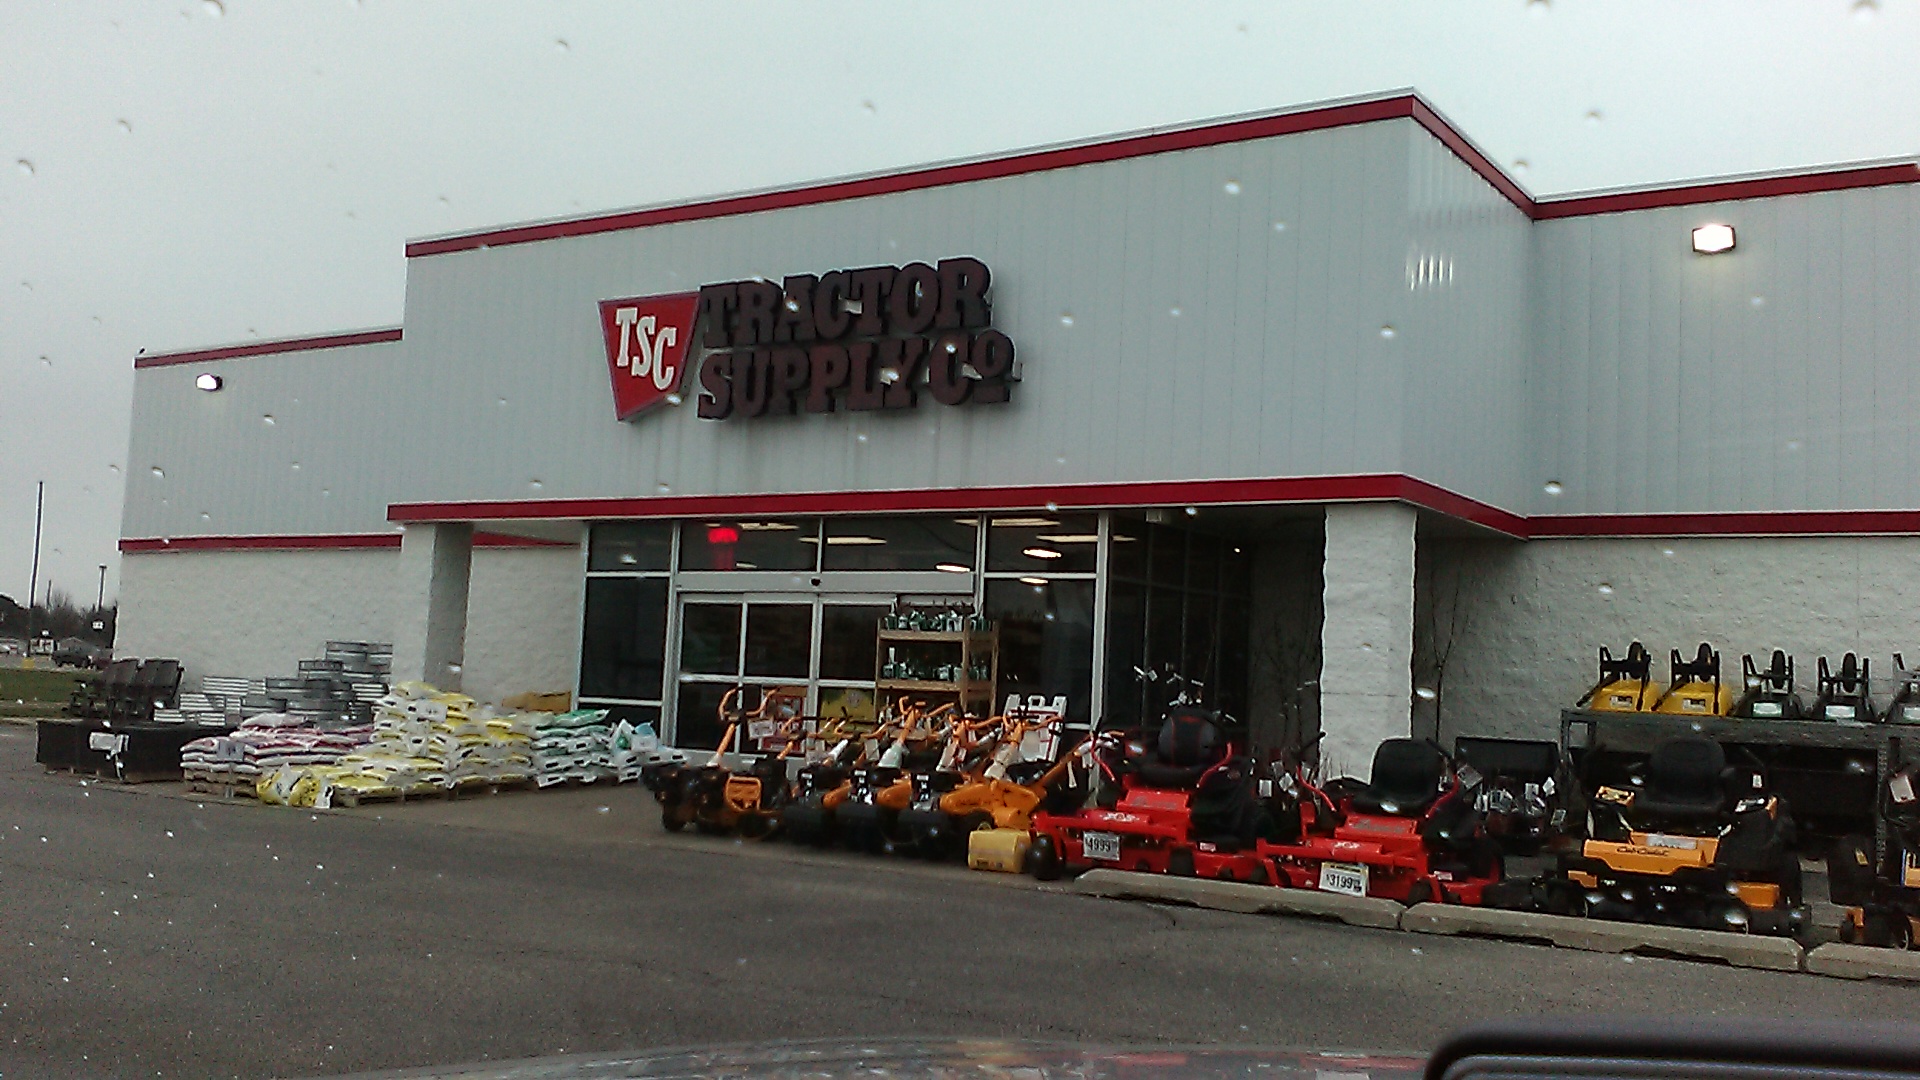 Tractor Supply Co.